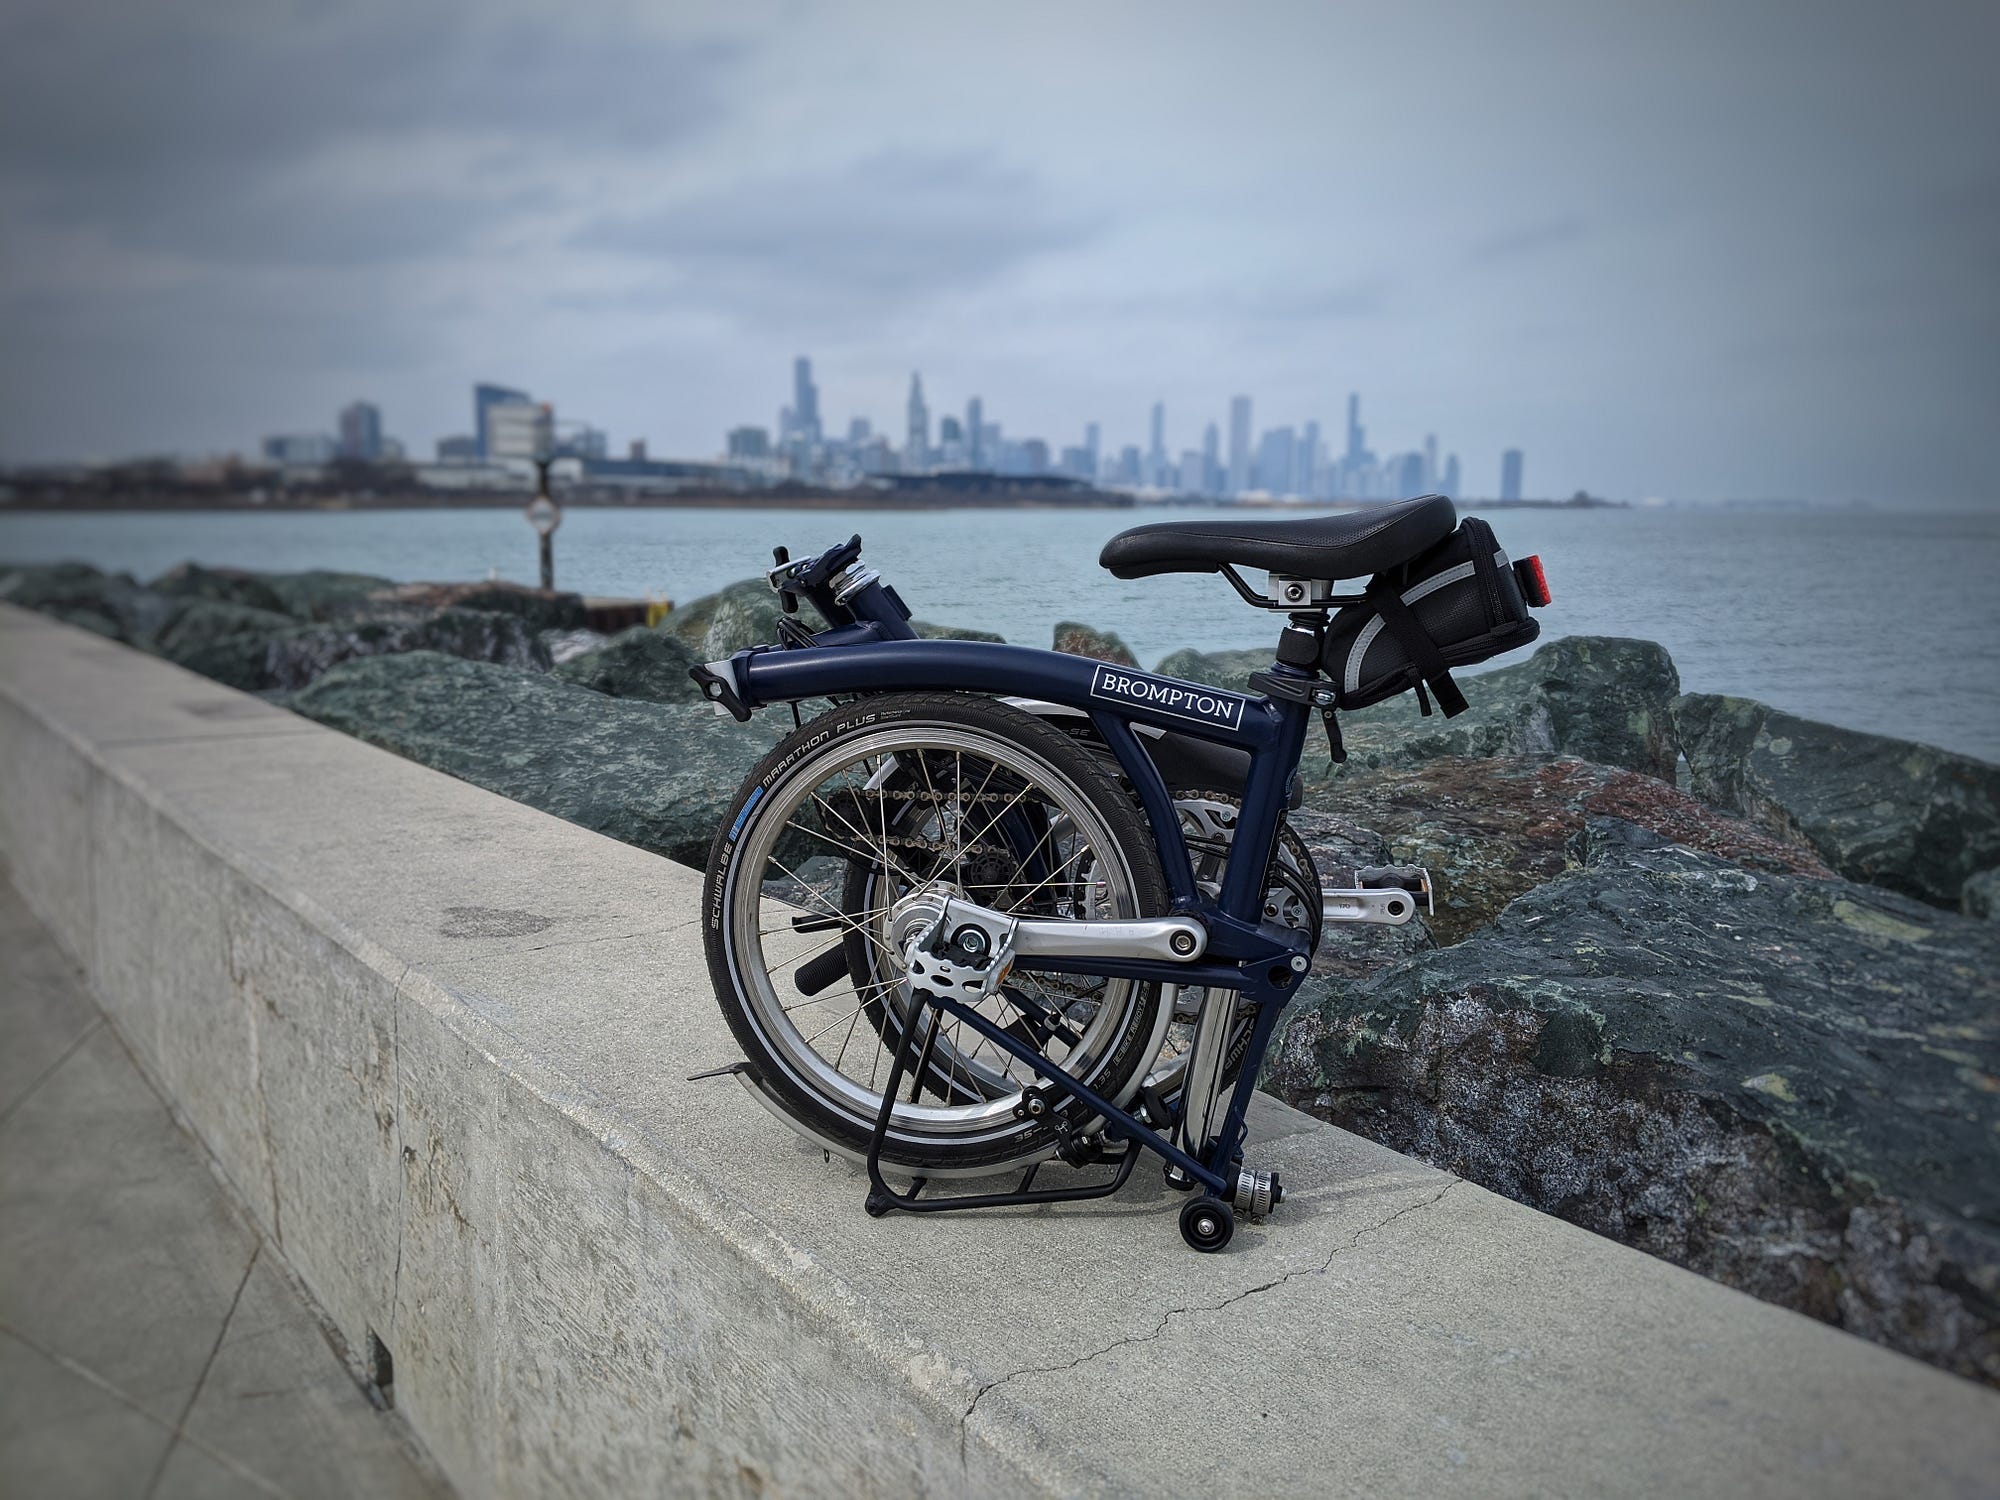 2000 Miles on the Brompton: Is This Your Next Bike? | by Nick